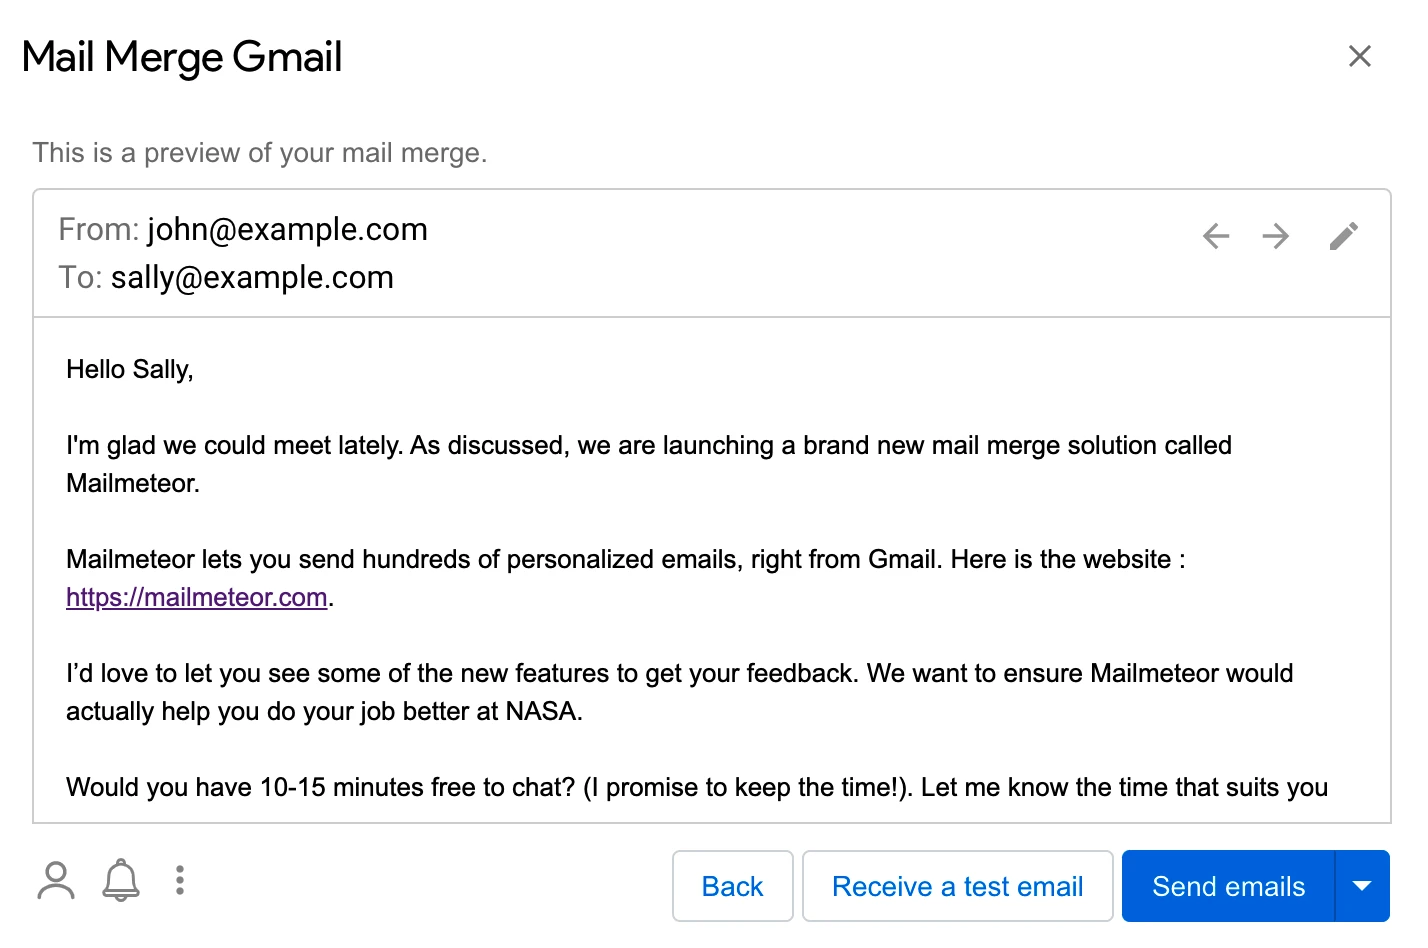 Mail Merge Gmail preview